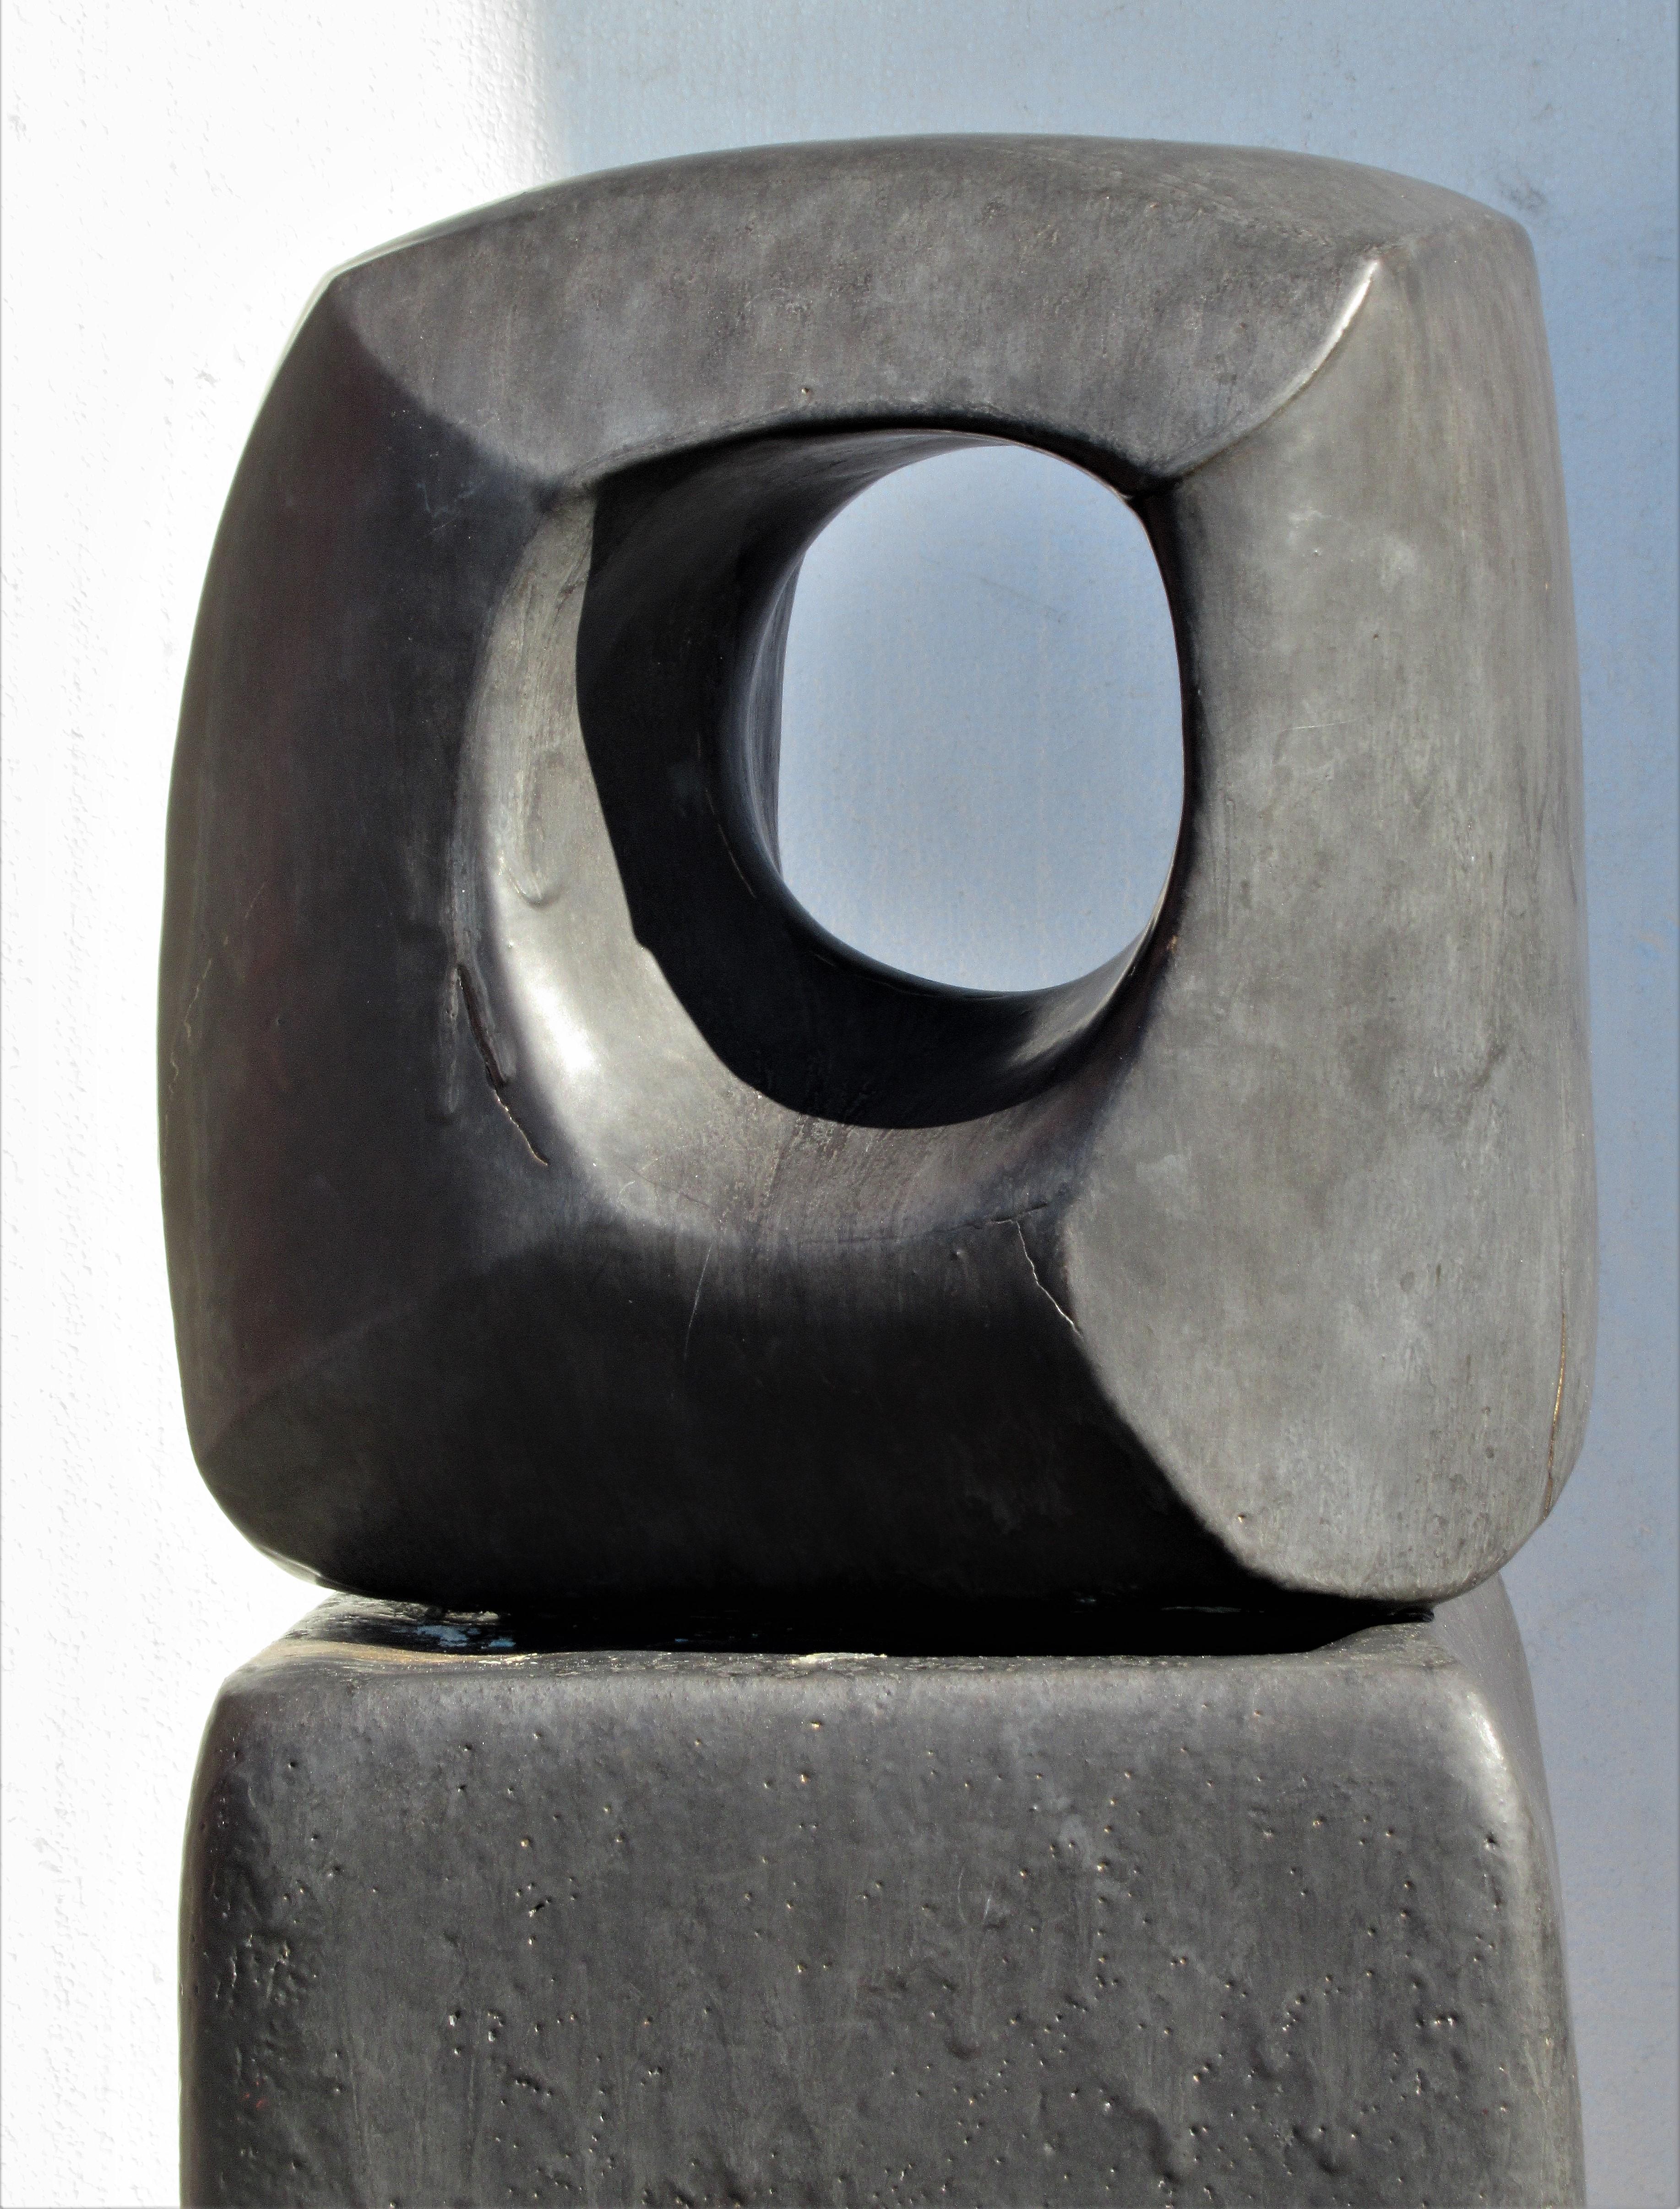 Abstract modernist slate black satin glazed hand built studio ceramic sculpture with accompanying hand built pedestal. In the manner of Barbara Hepworth, dating from the latter part of the 20th century. Illegibly signed on underside of sculpture.